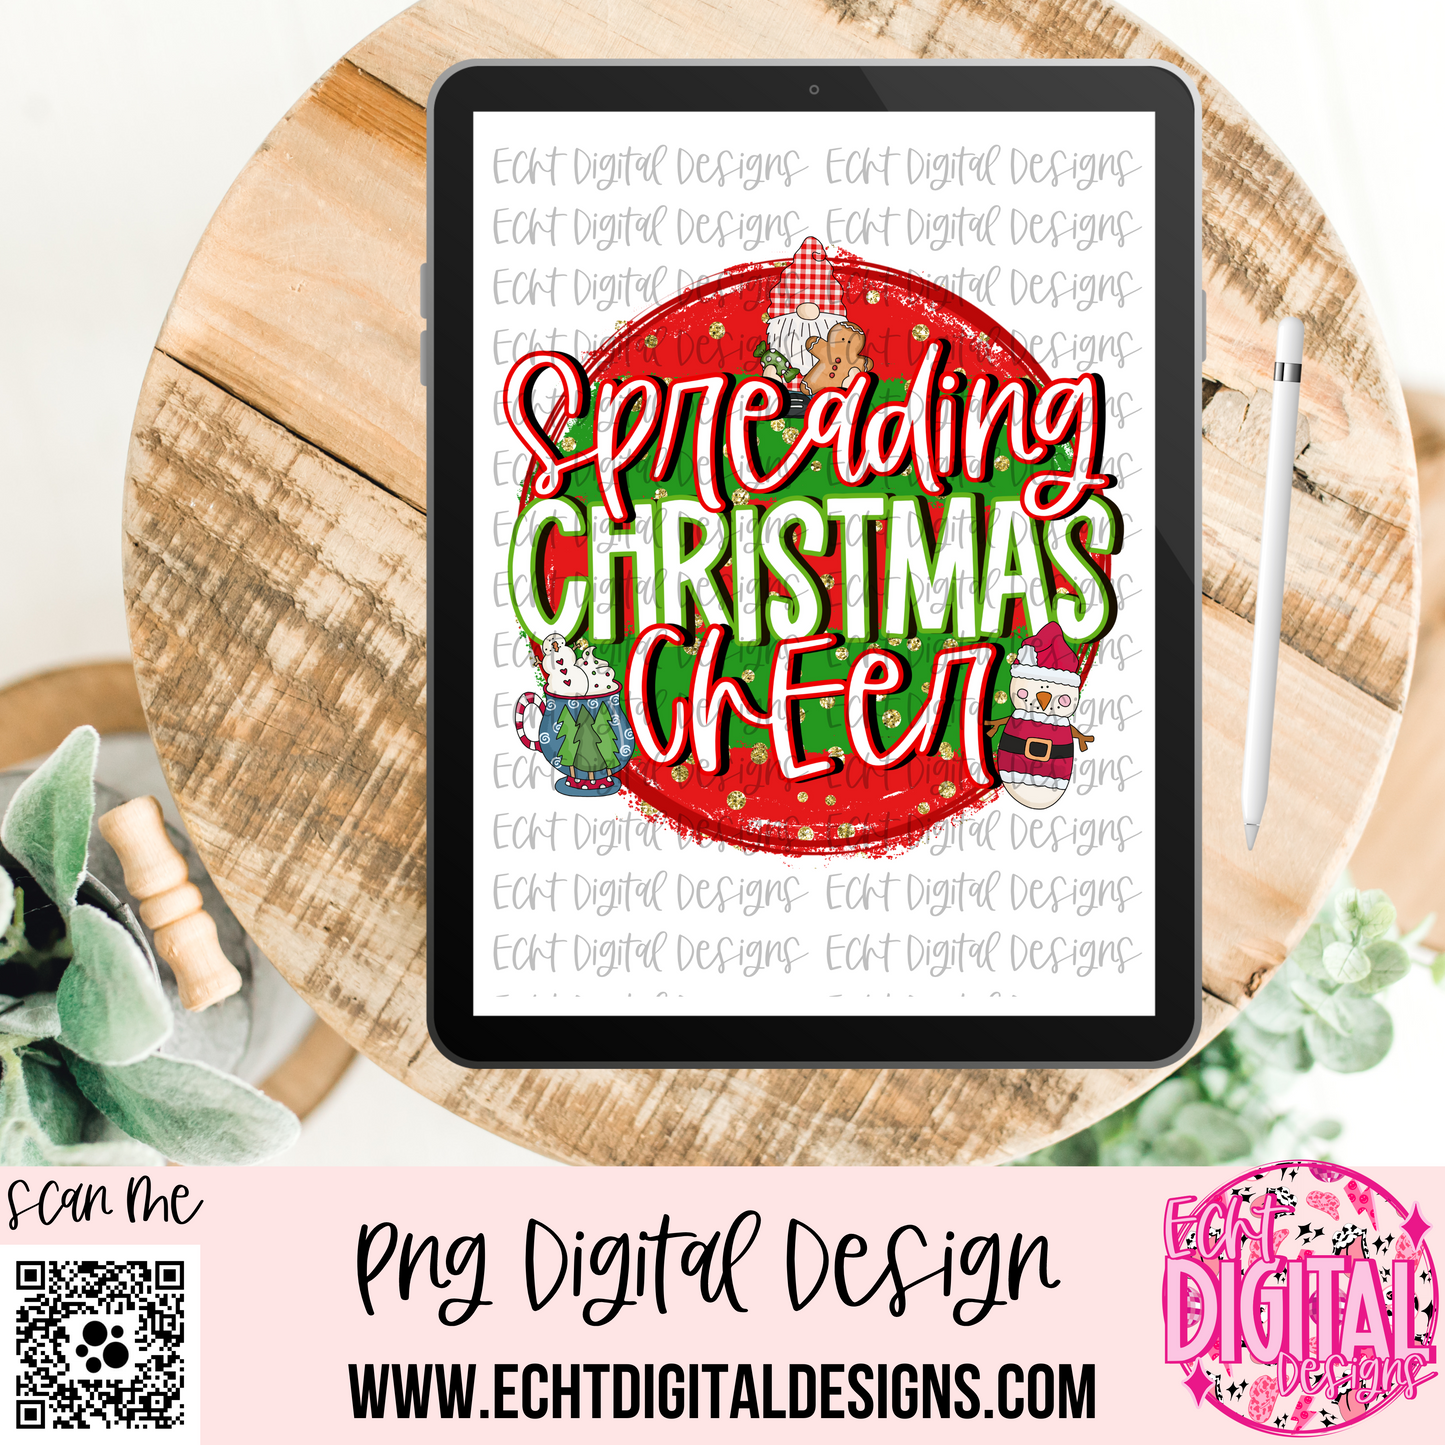 Spreading Christmas Cheer PNG Digital Download